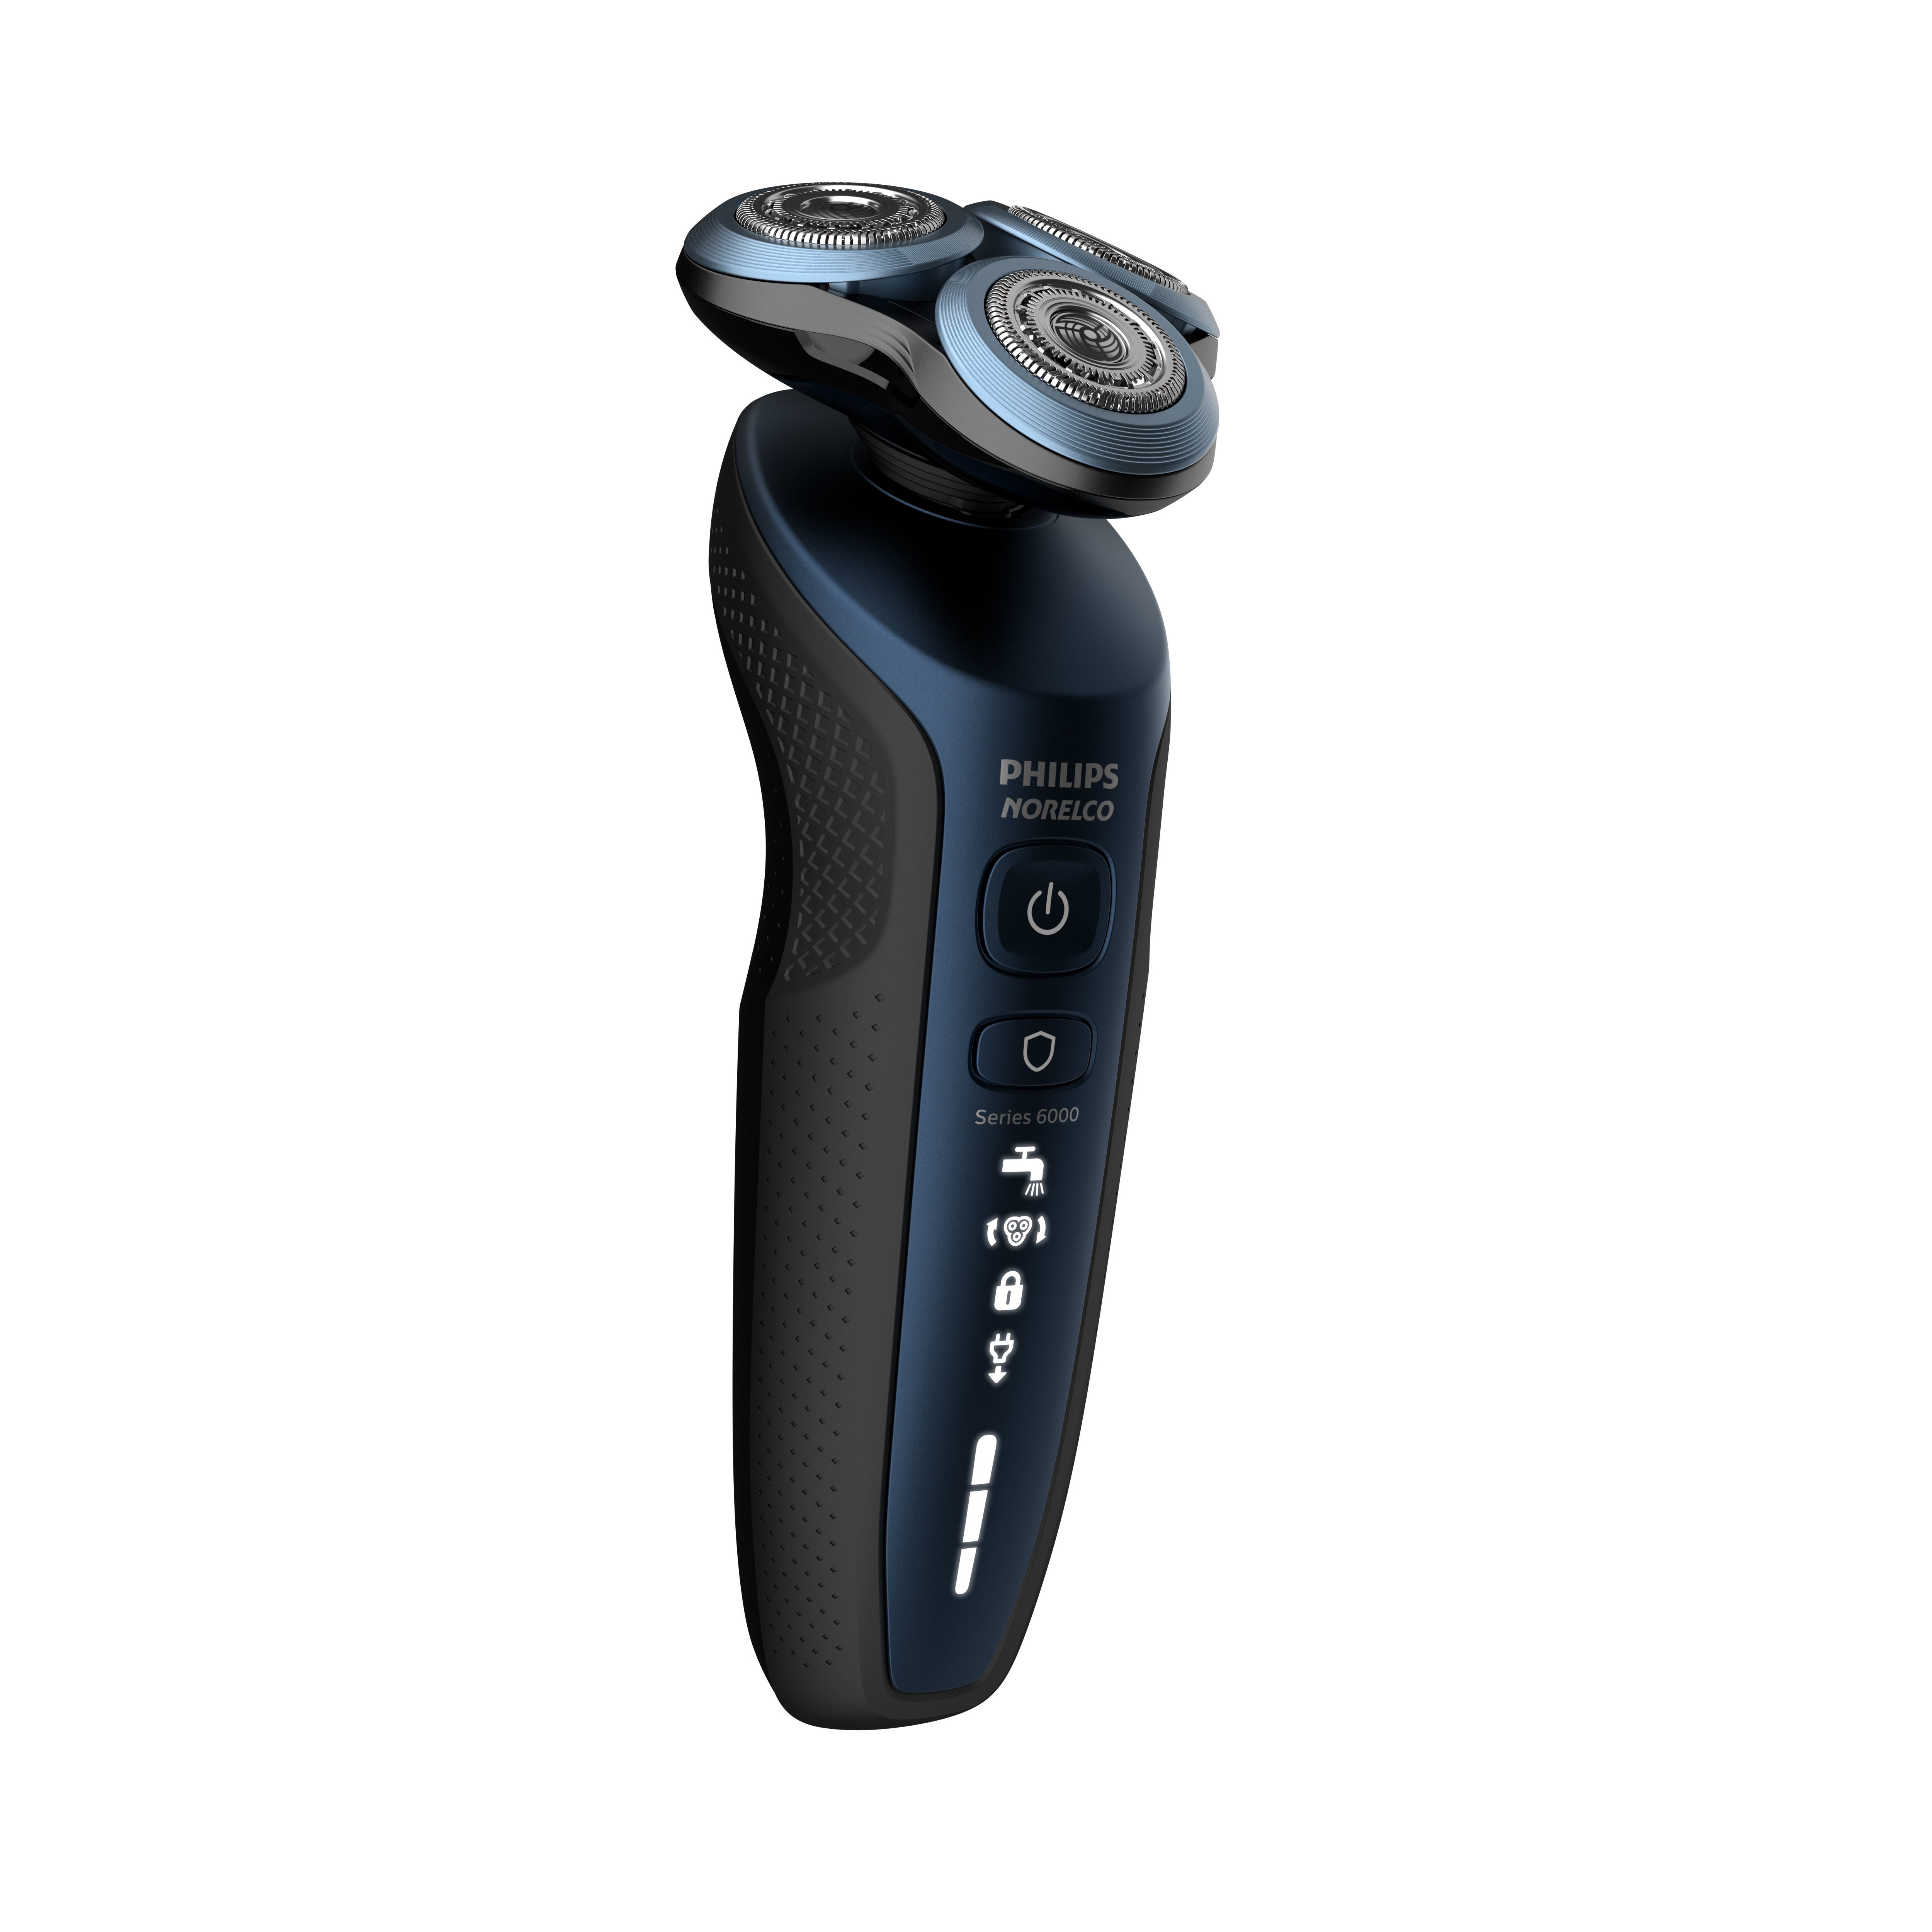 Philips Norelco Electric Shaver 6850 with Precision Trimmer and Nose Trimmer Attachment, S6850/85 - image 2 of 7